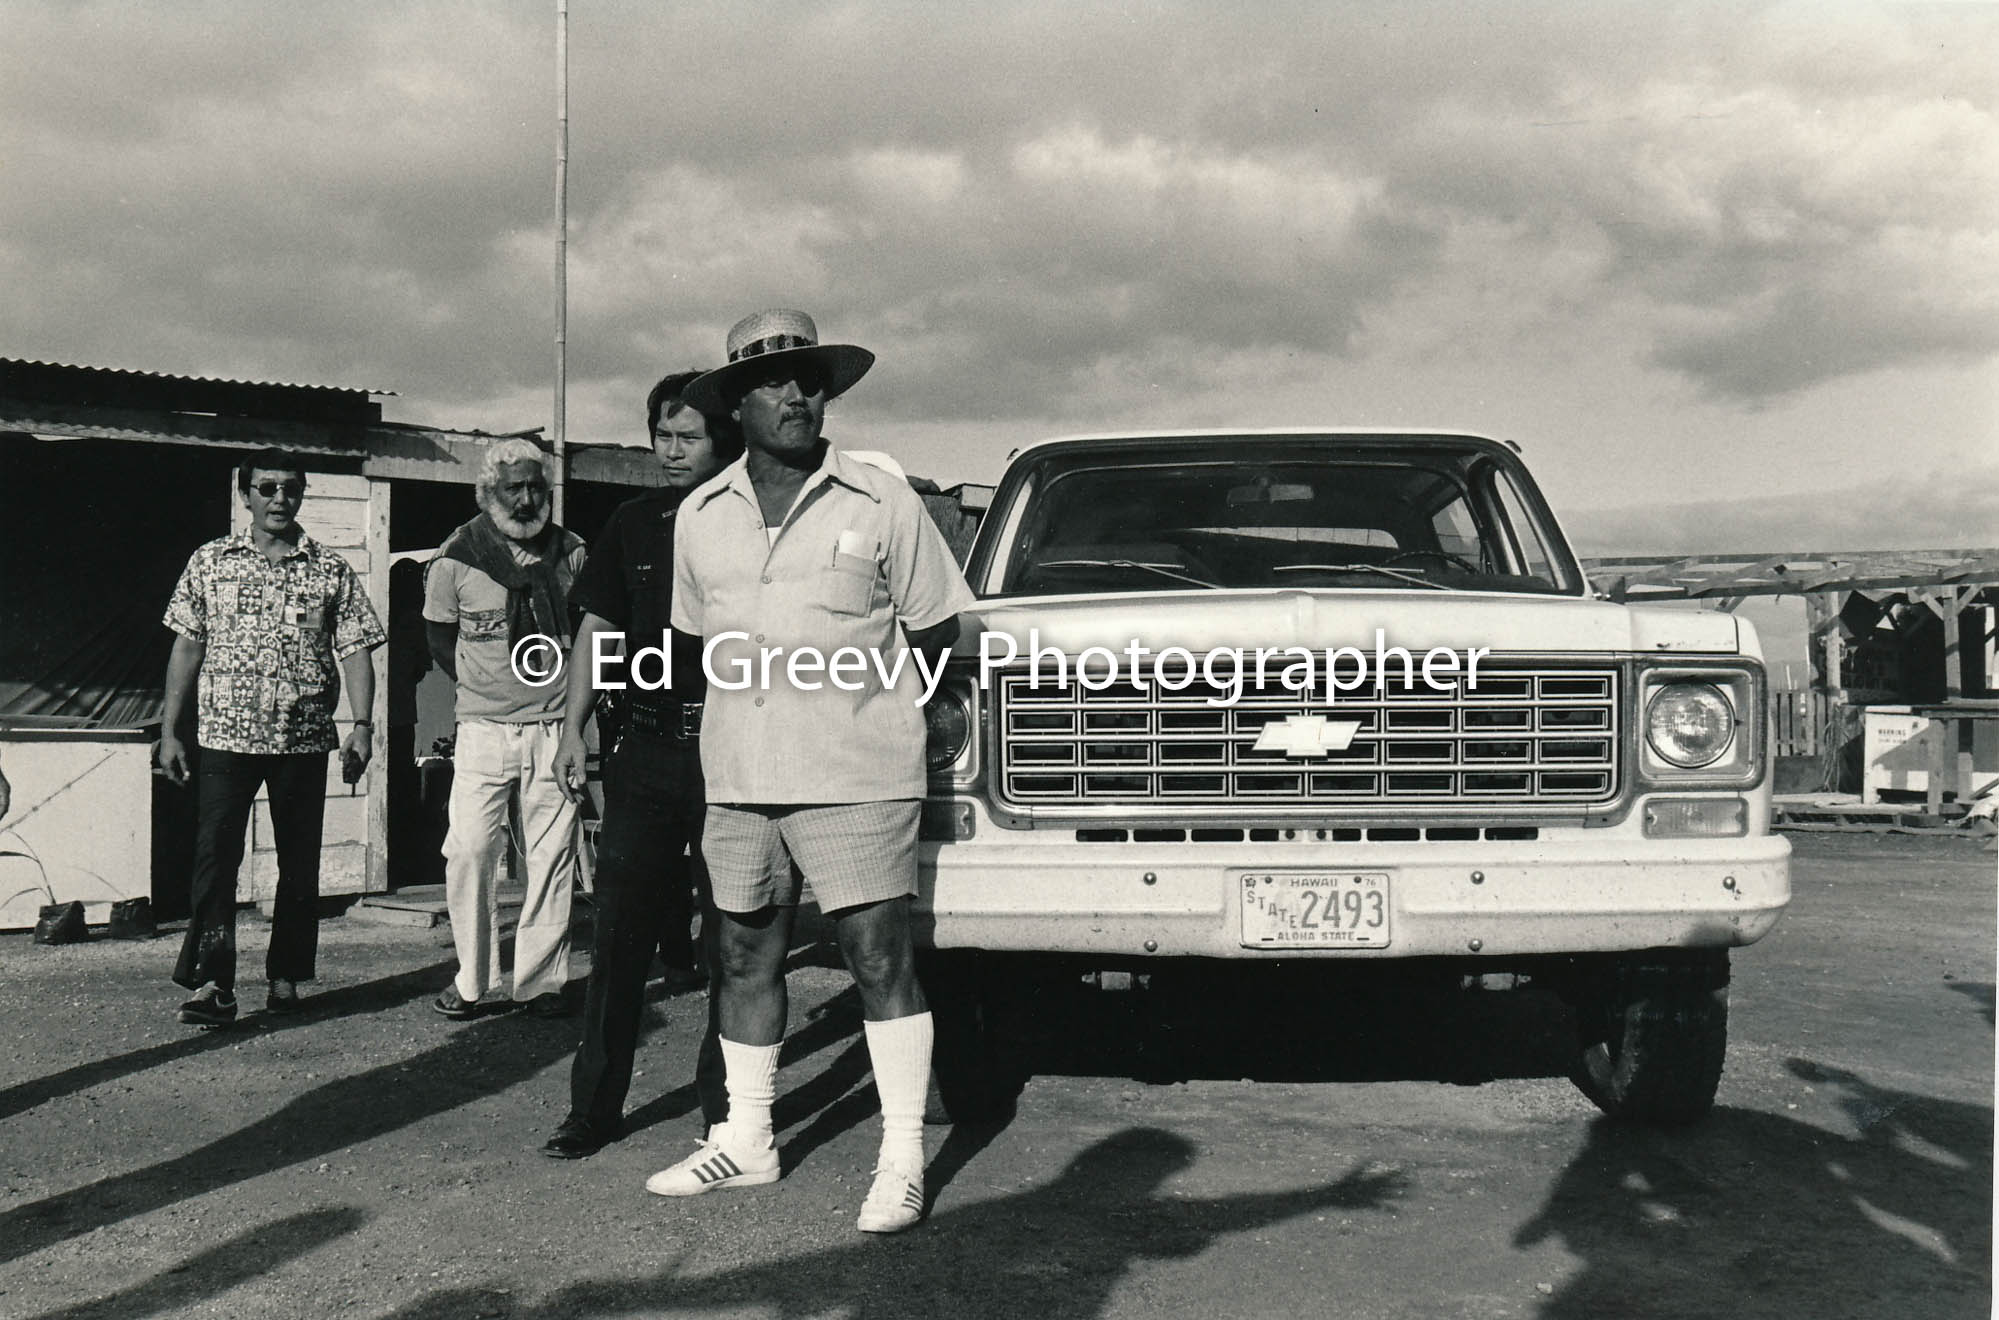 Walter Paulo and Puhipau arrested at Sand Island (23 January 1980) Negative: 4096-3-37 | Ed Greevy Photographer